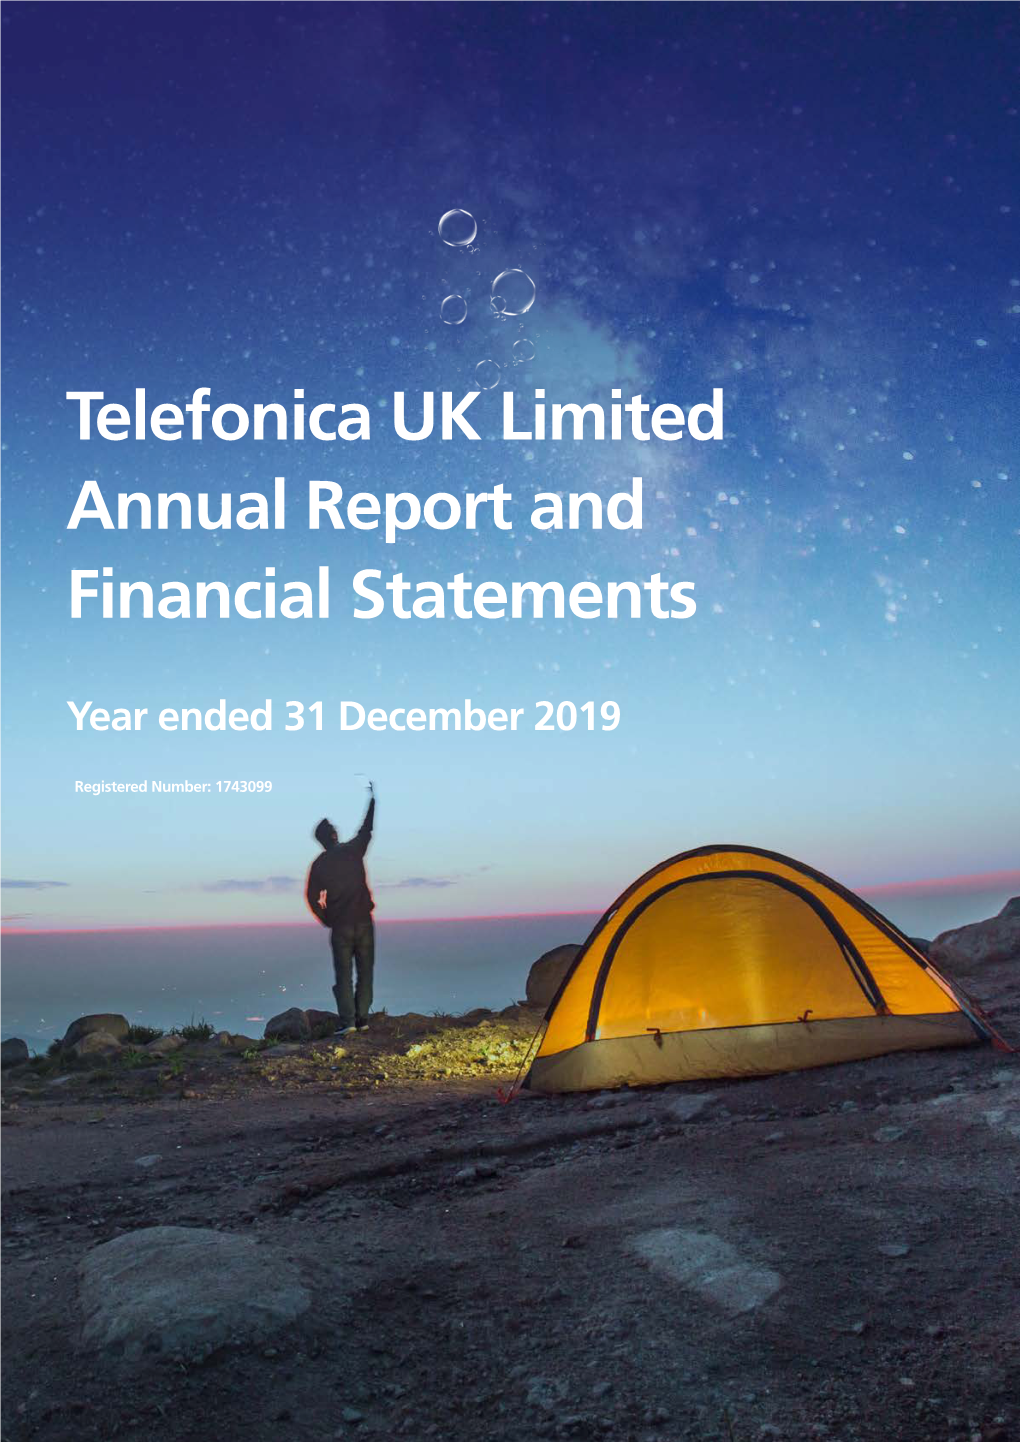 Telefonica UK Limited Annual Report and Financial Statements